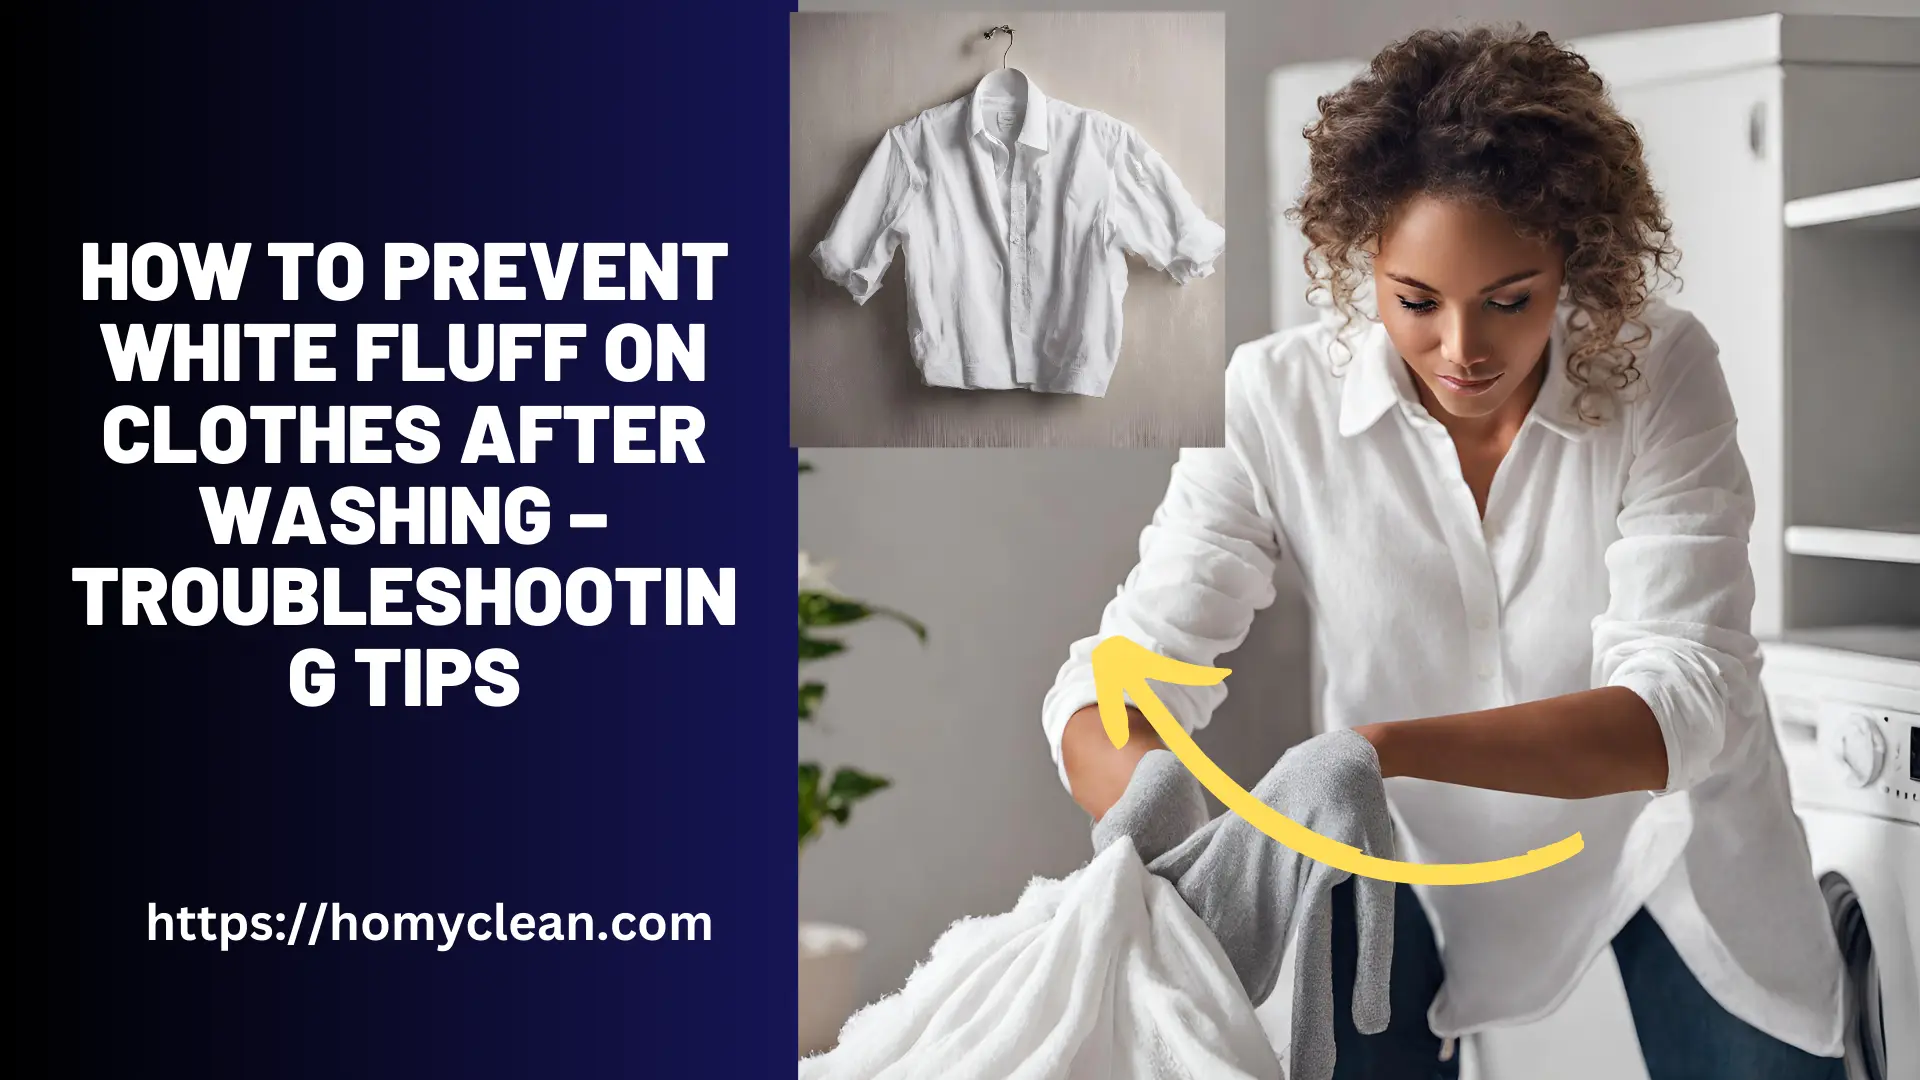 How to Prevent White Fluff on Clothes After Washing